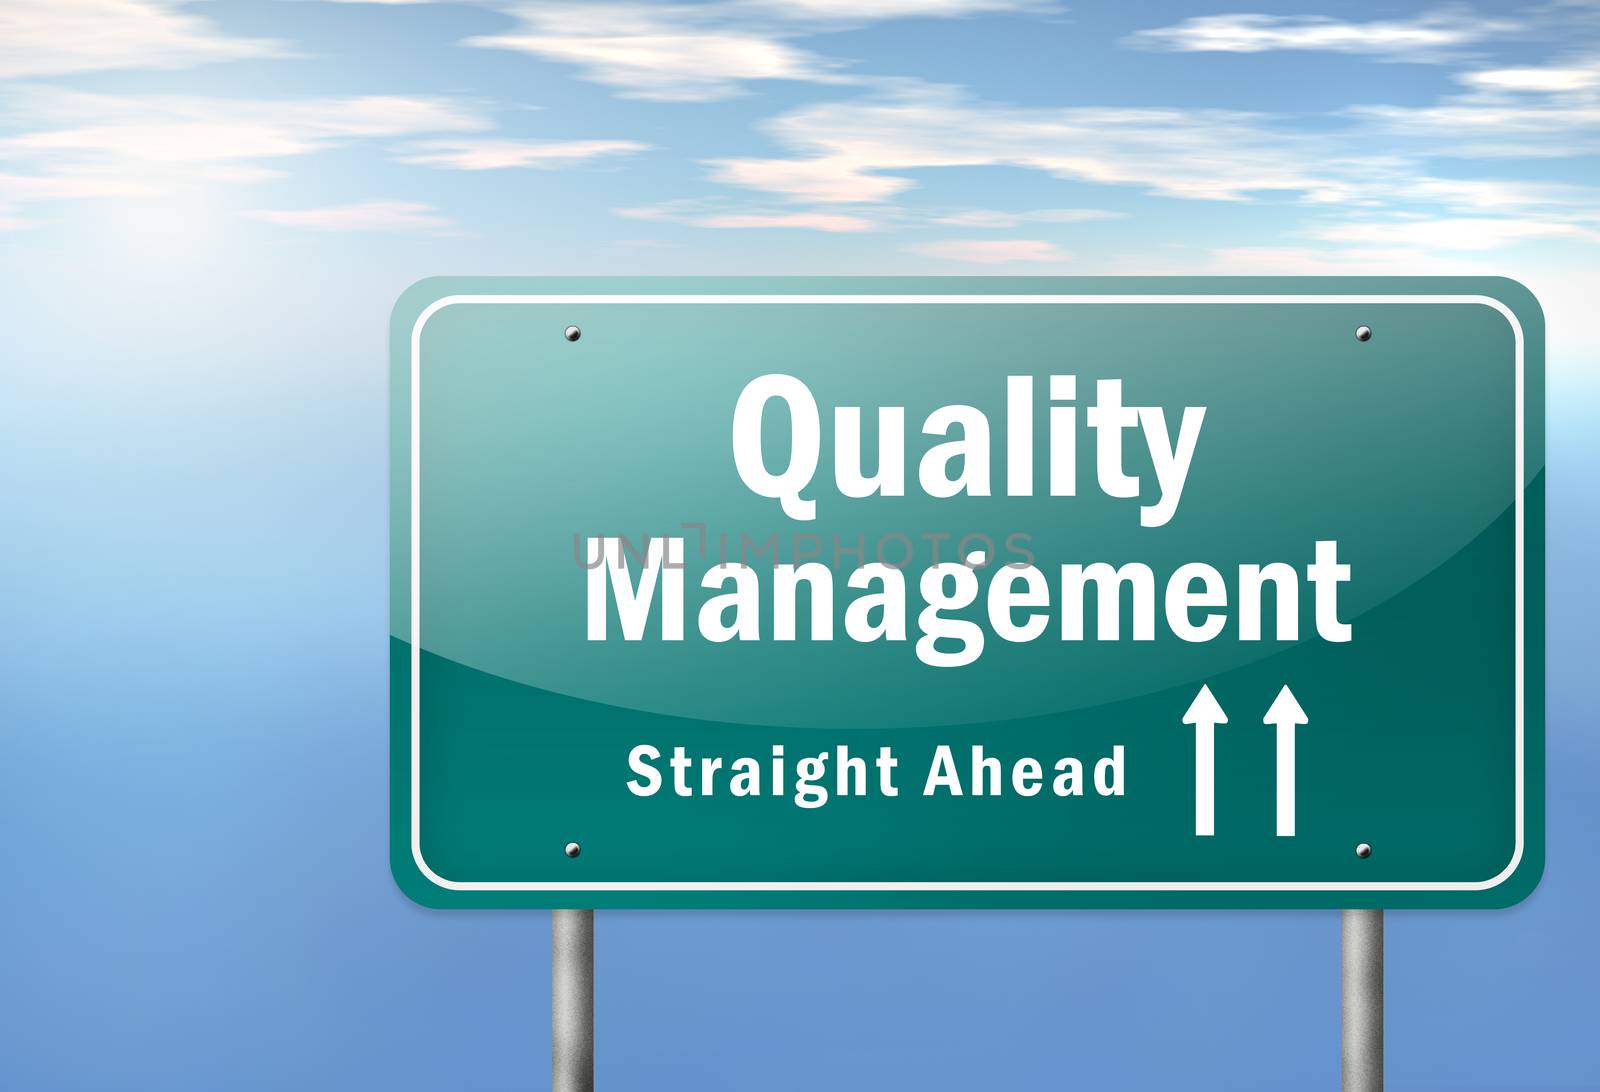 Highway Signpost with Quality Management wording